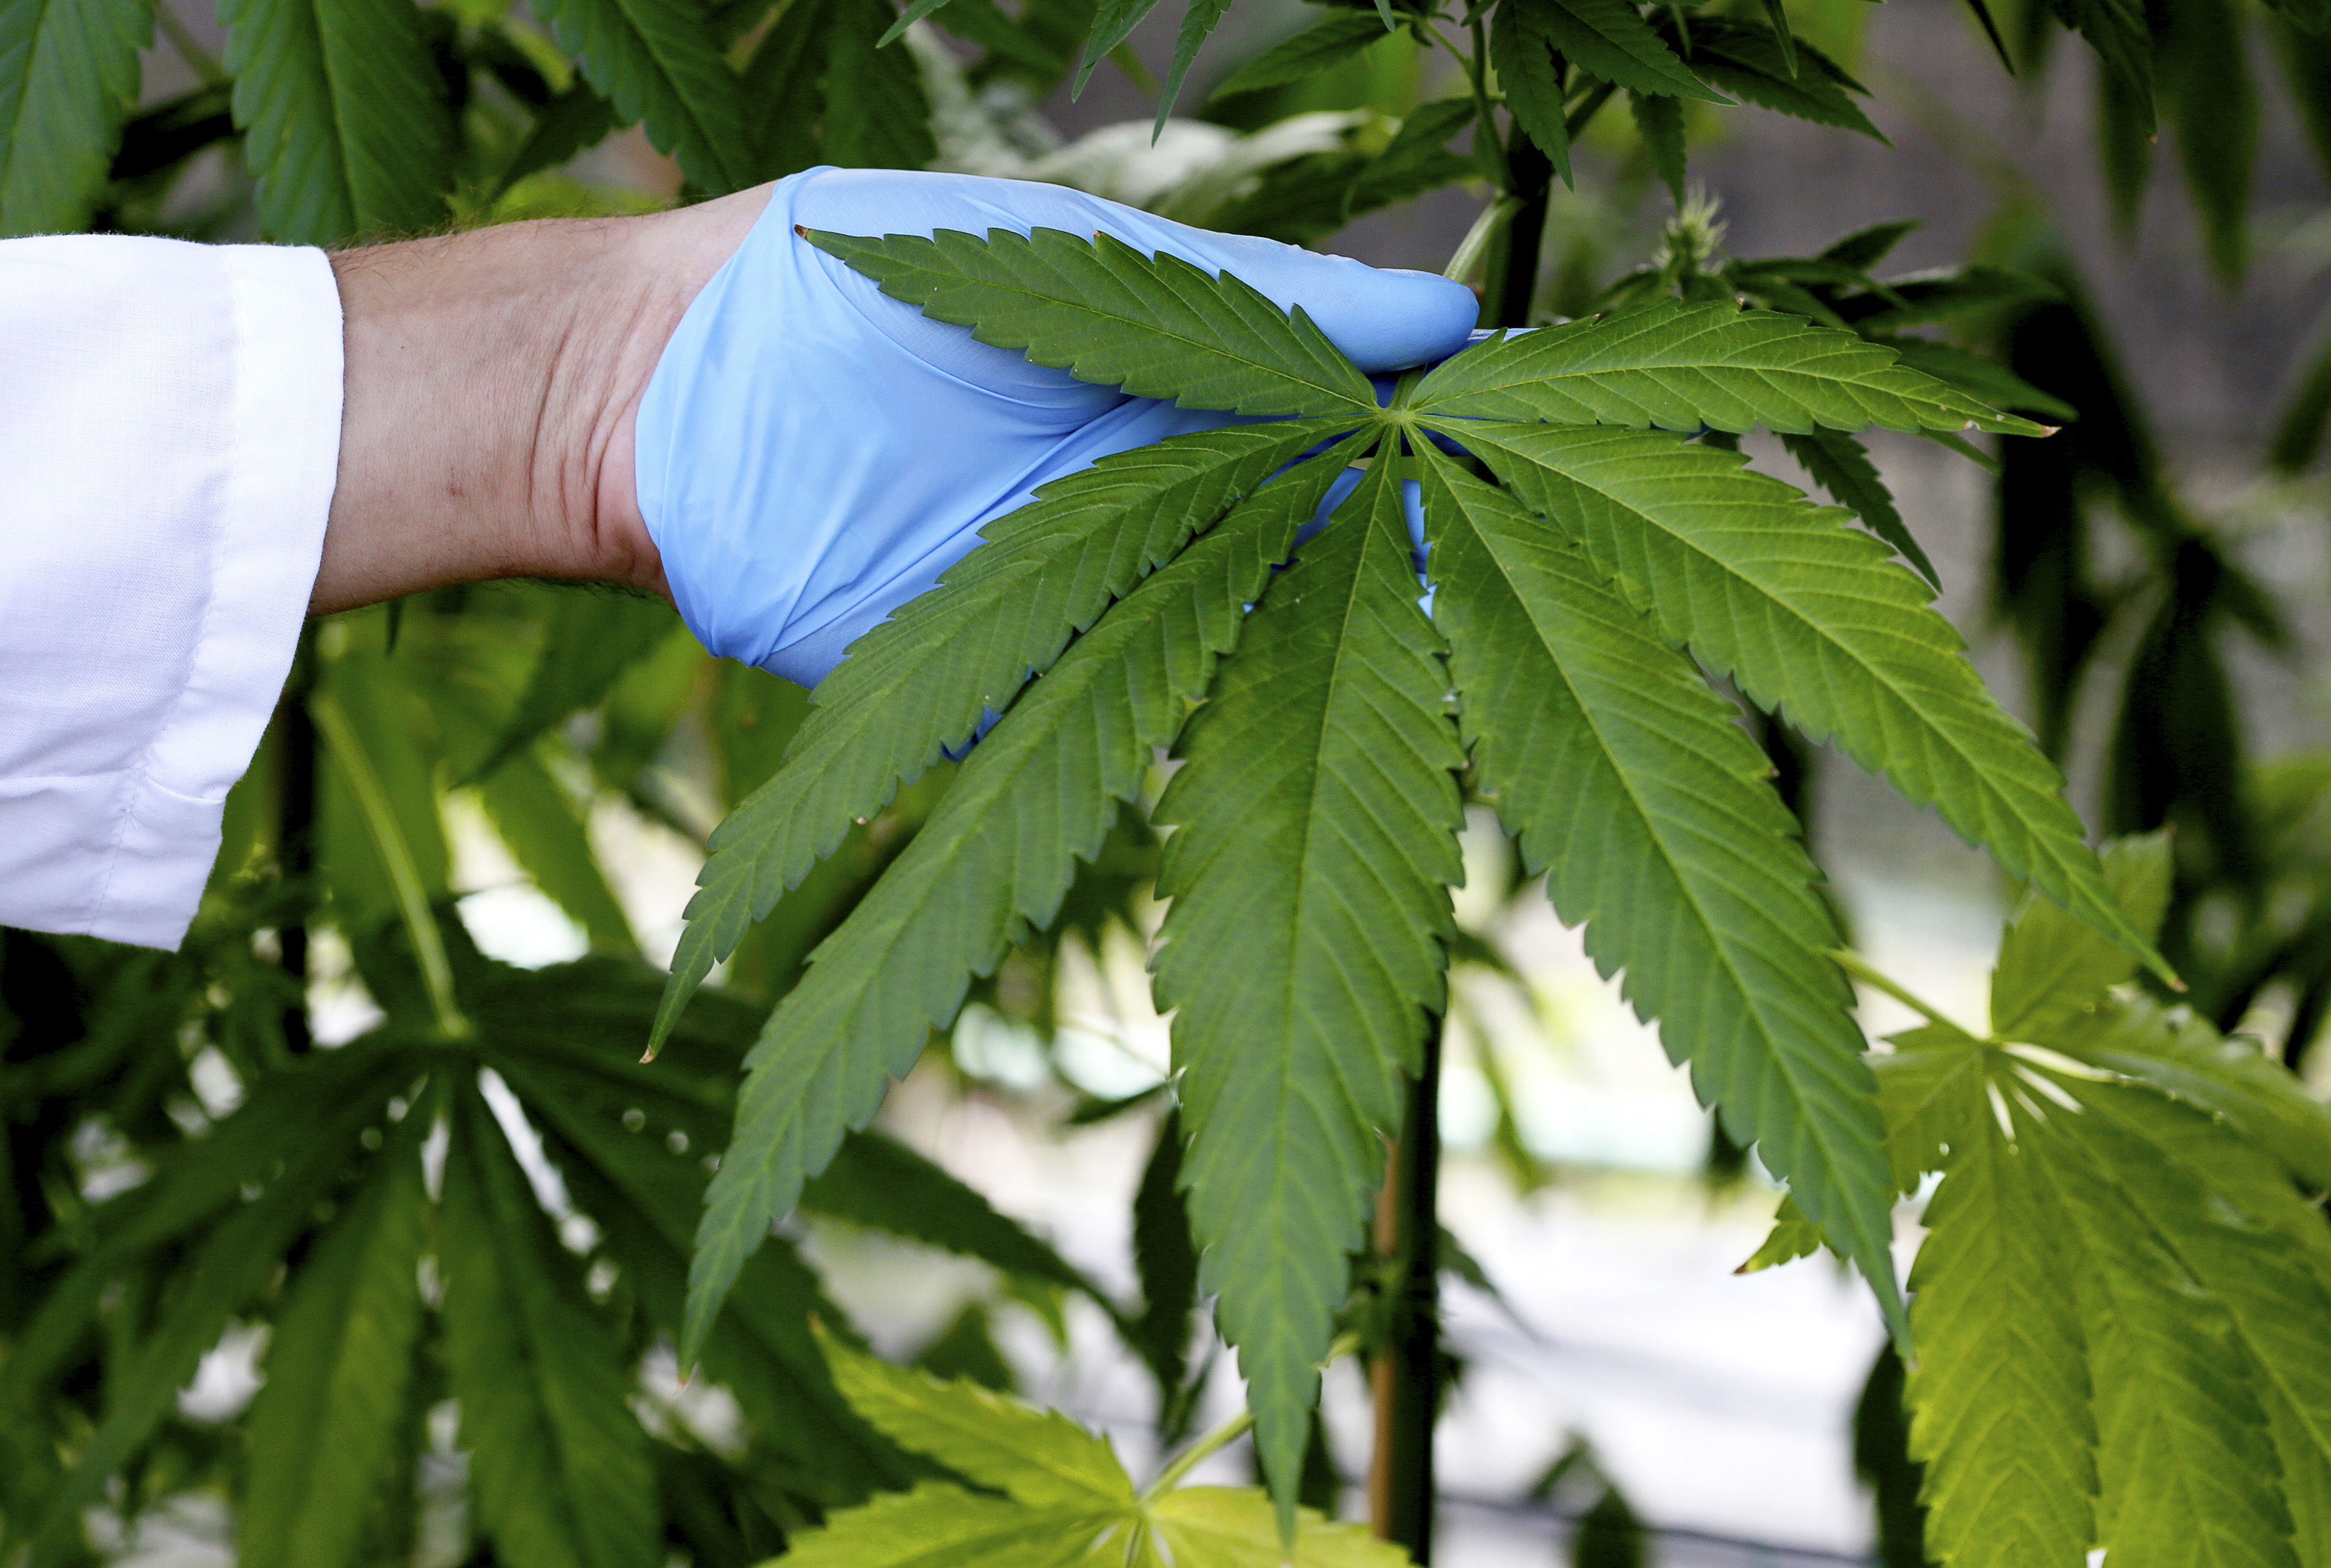 A production assistant inspects a Cannabis plant in a state-owned agricultural farm in Rovigo